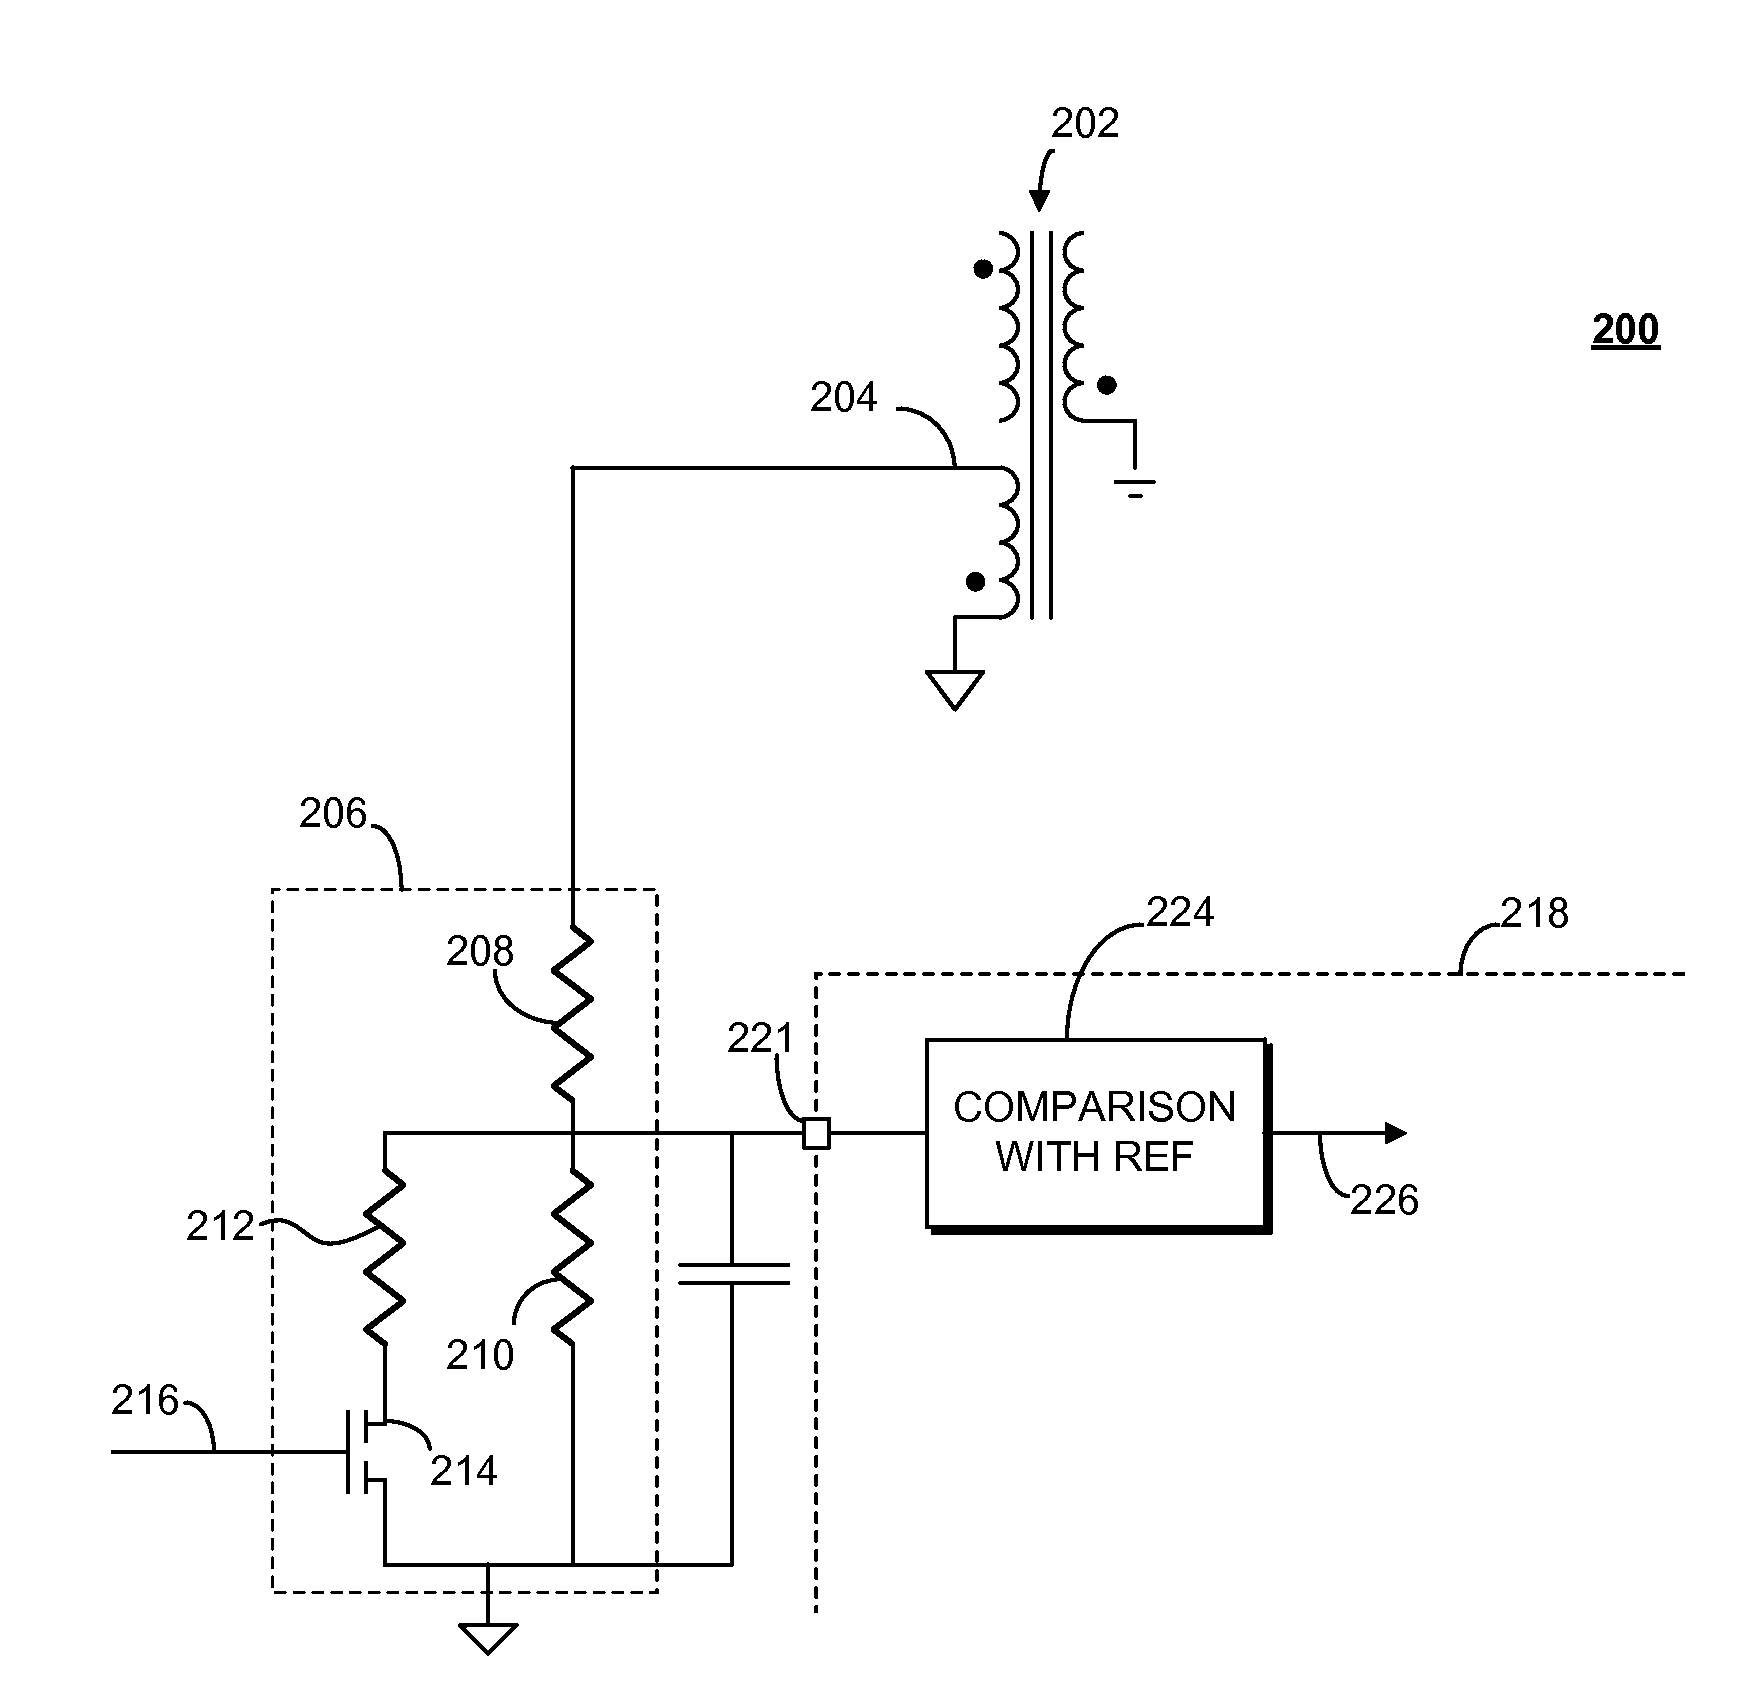 Method and apparatus for charging batteries having different voltage ranges with a single conversion charger